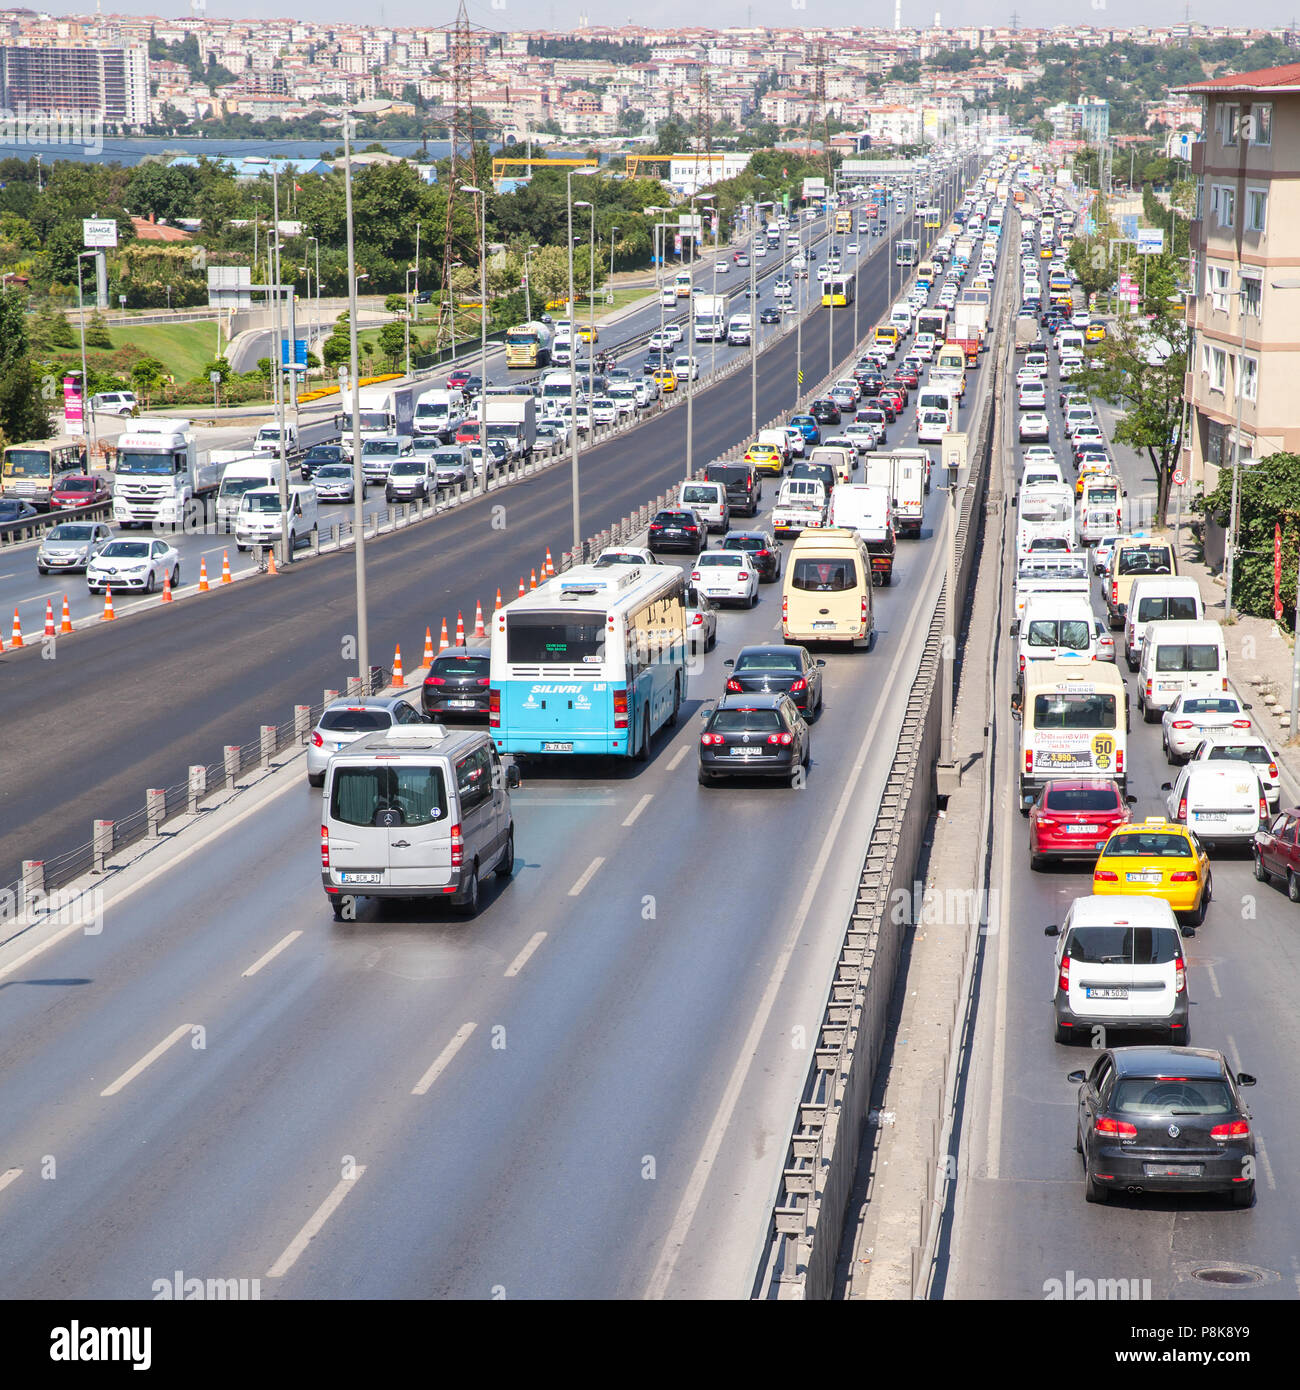 Istanbul, Turkey - June 27, 2016: Traffic jam at E5 highway, Avcilar district of Istanbul Stock Photo